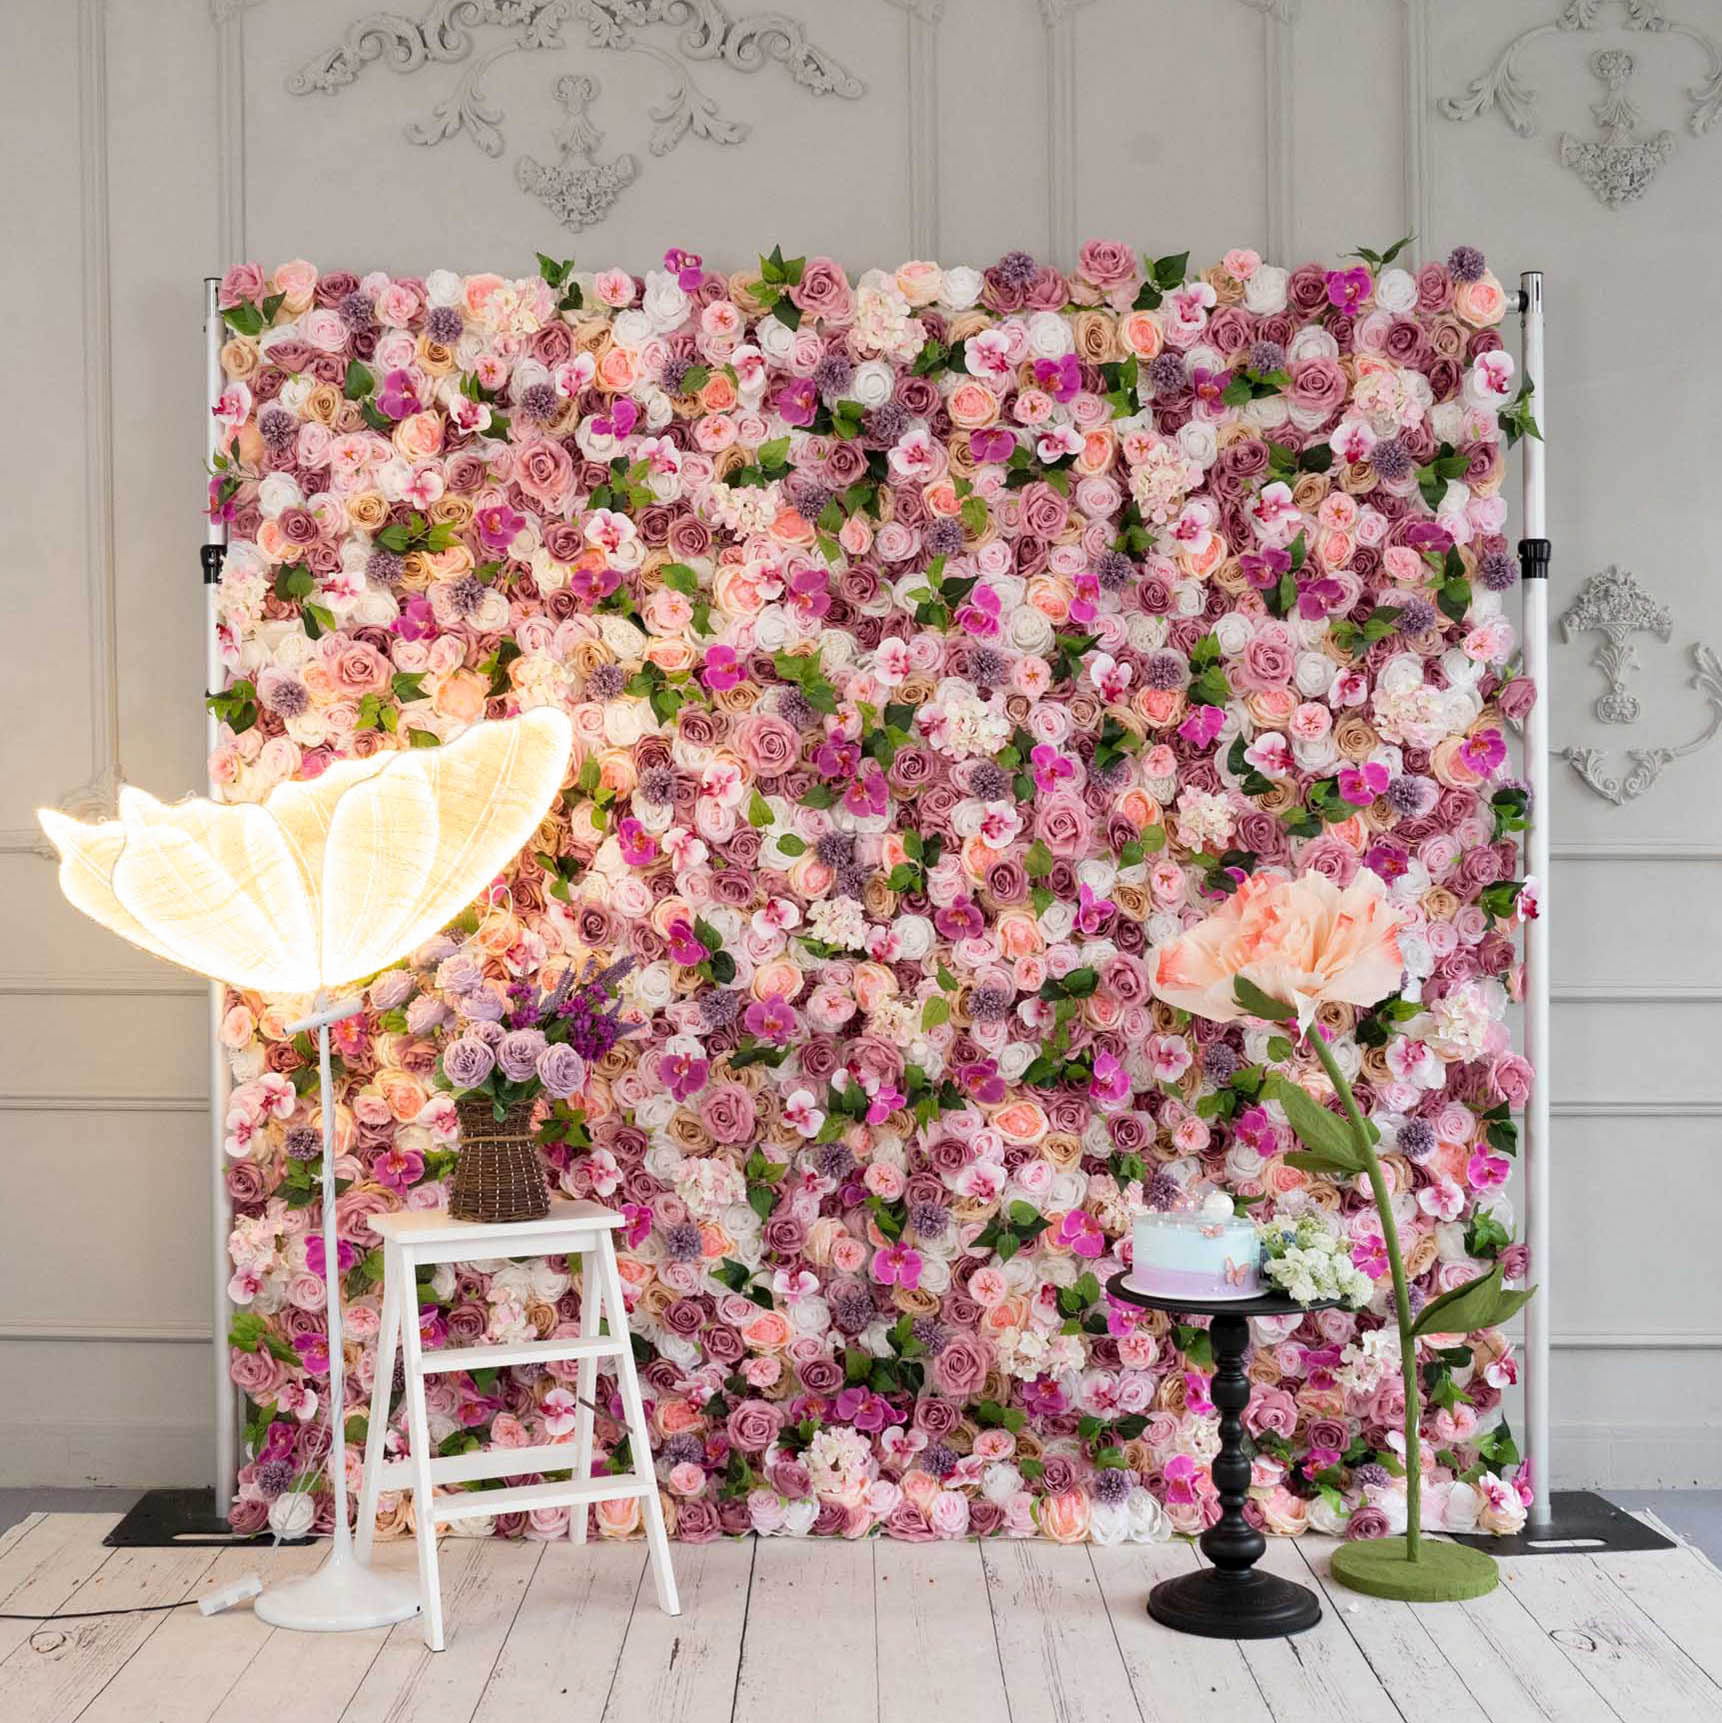 Flower Wall Fall Lotus Root Pink Fabric Rolling Up Curtain Floral Backdrop Wedding Party Proposal Decor